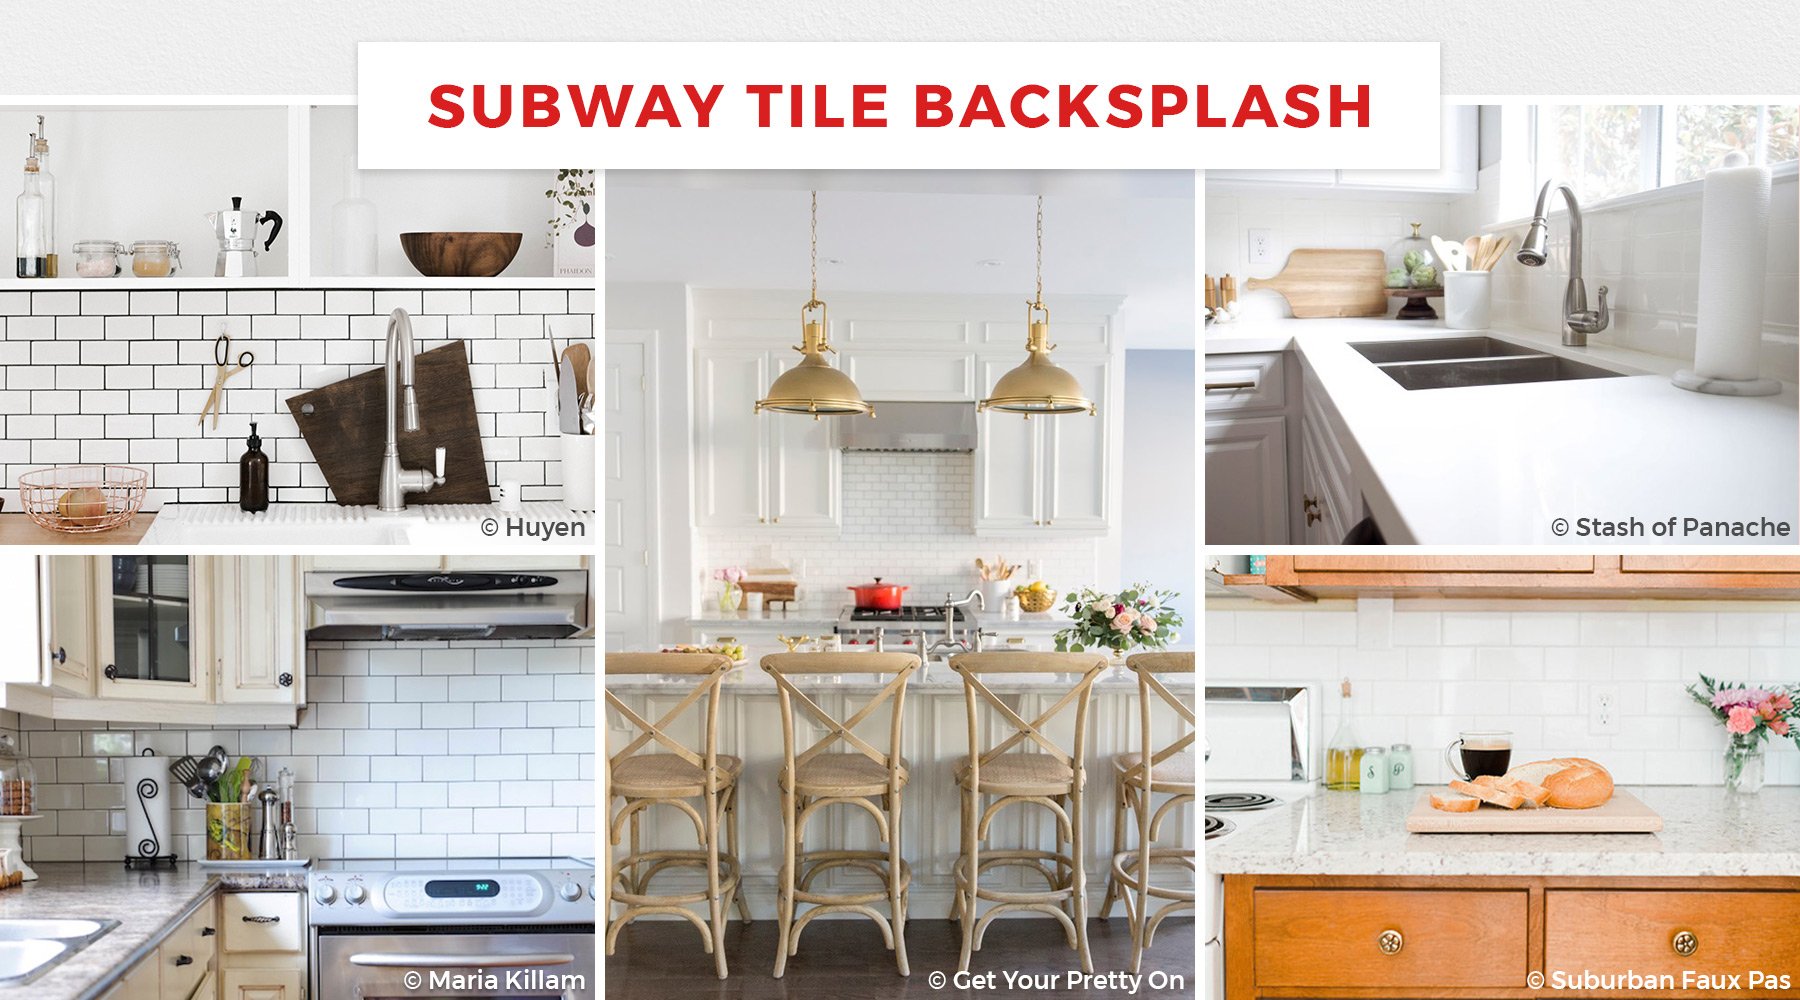 55 Best Kitchen Backsplash Ideas For 2020,Best Places To Travel In The World On A Budget